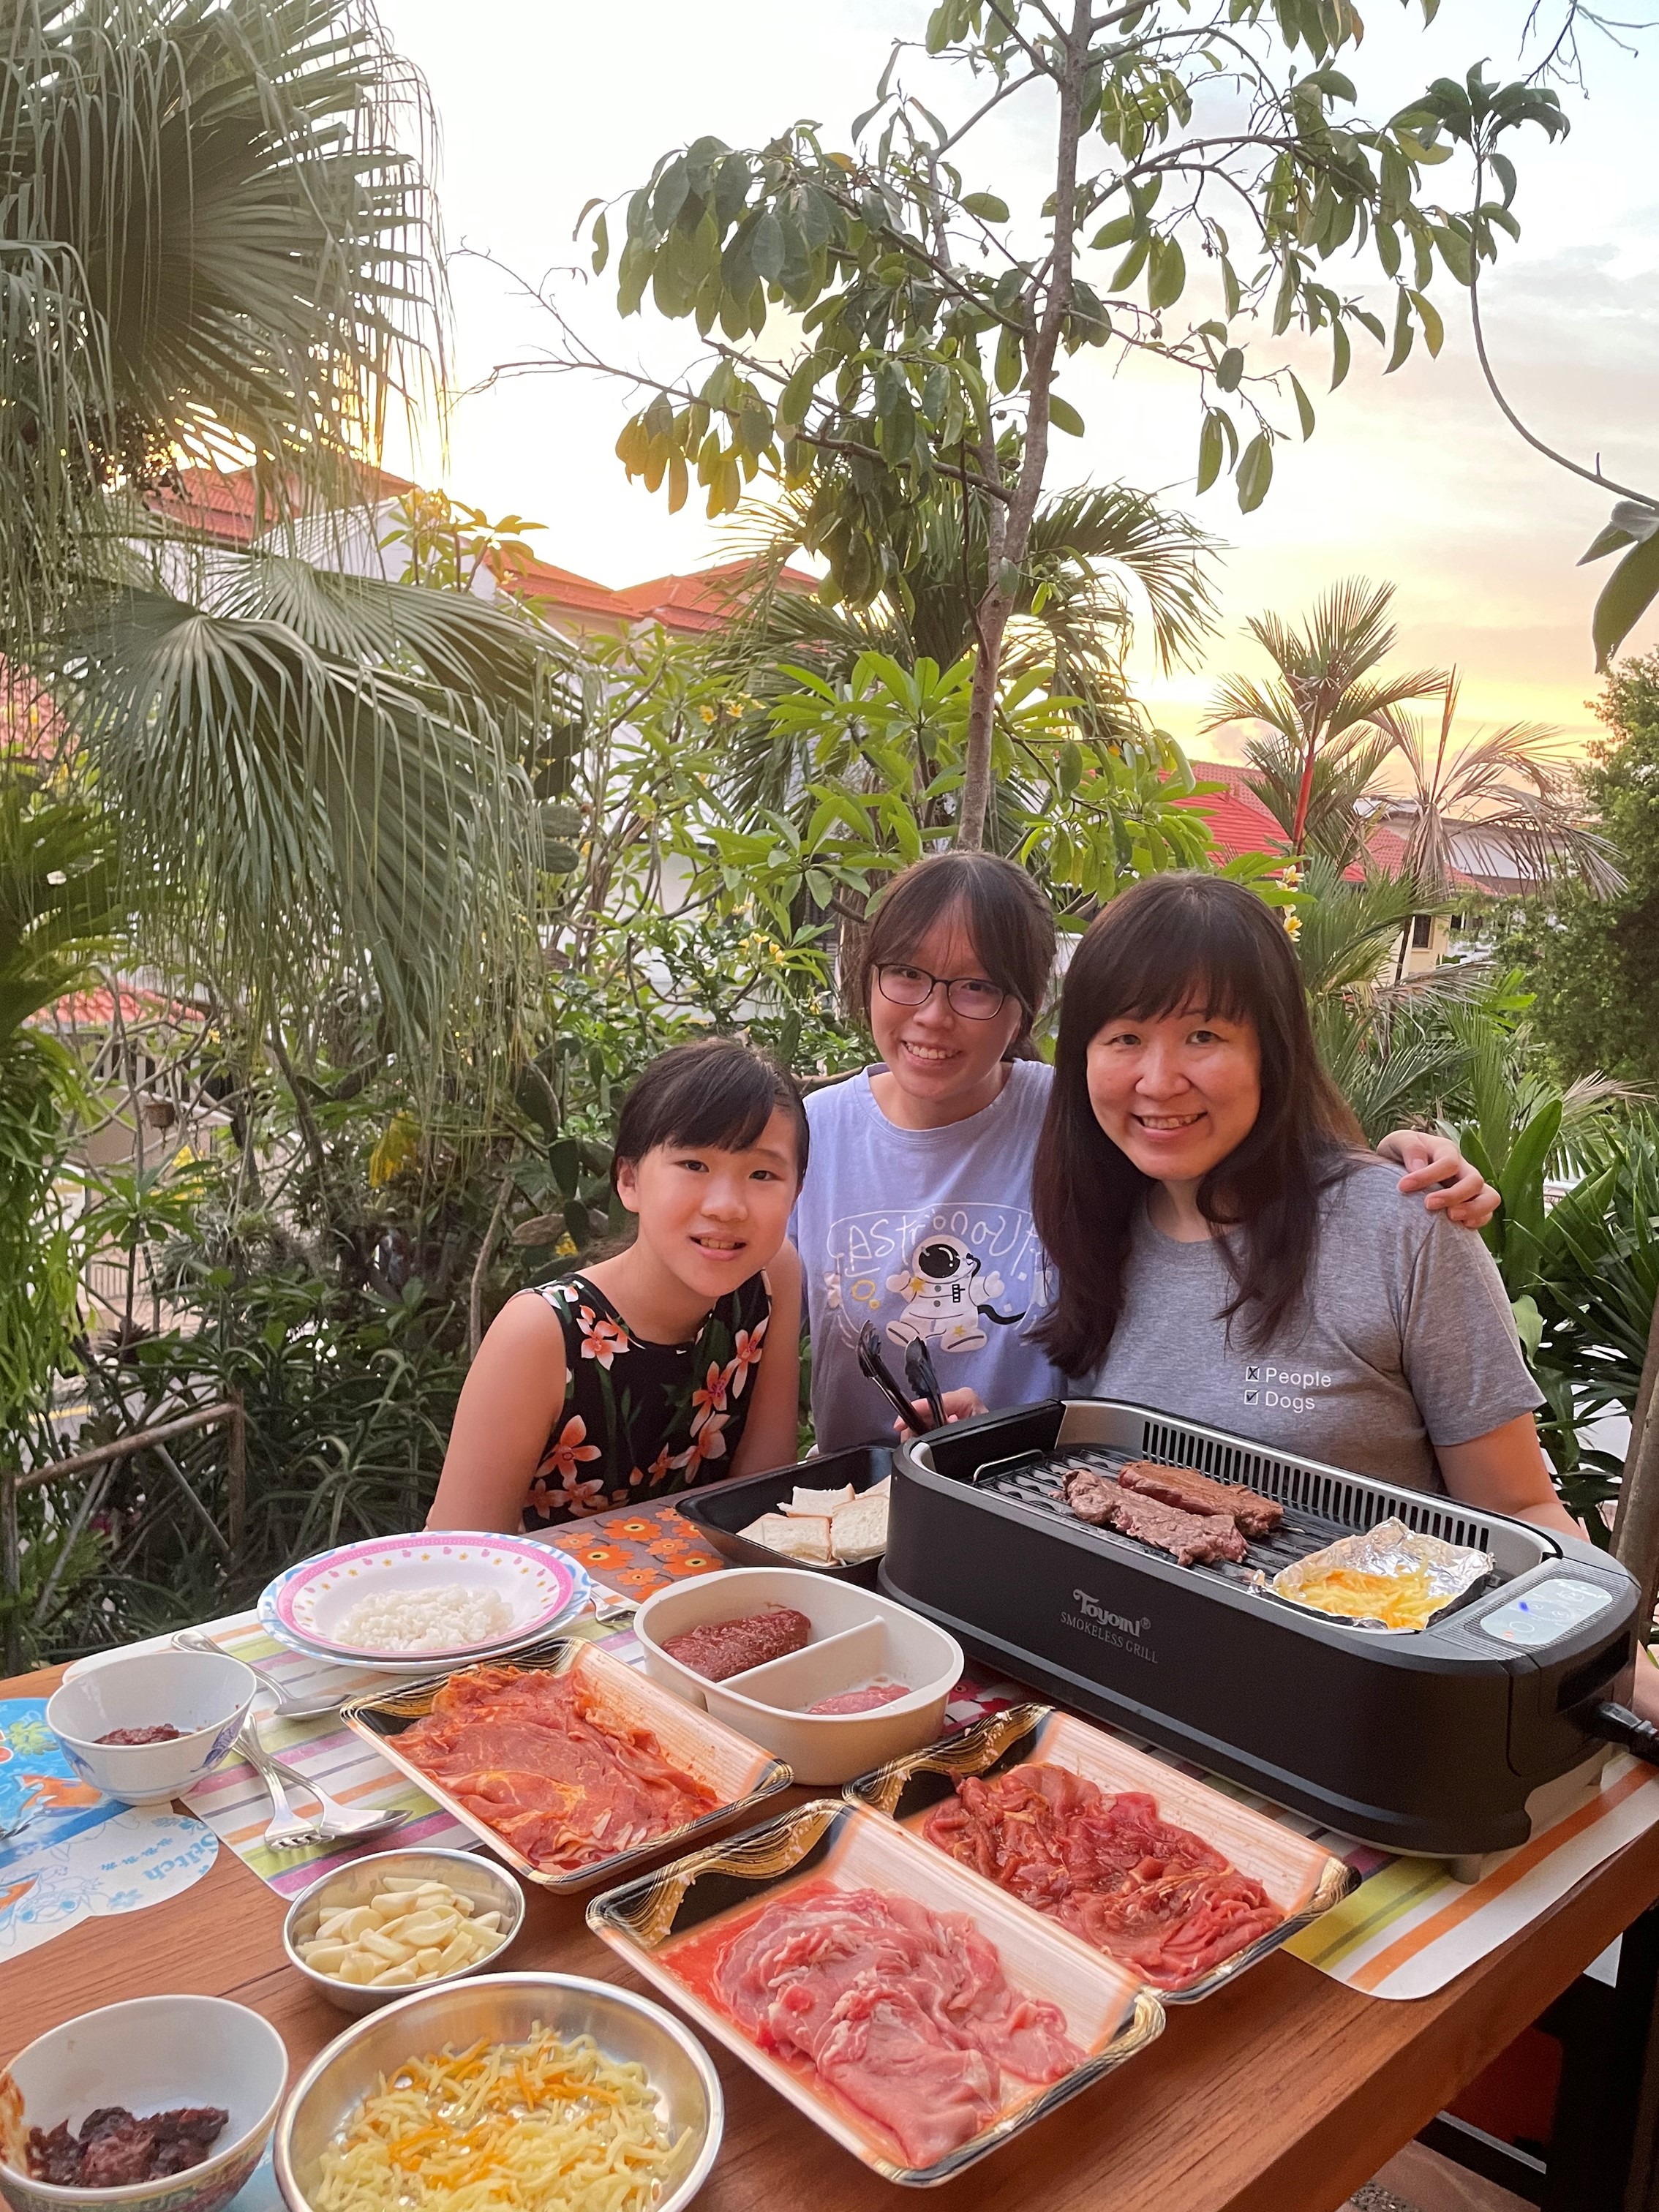 To Geck Pheng, family time not only consists of quality time spent with her daughters, but also time outdoors with her dog. Images courtesy of Lee Geck Pheng.